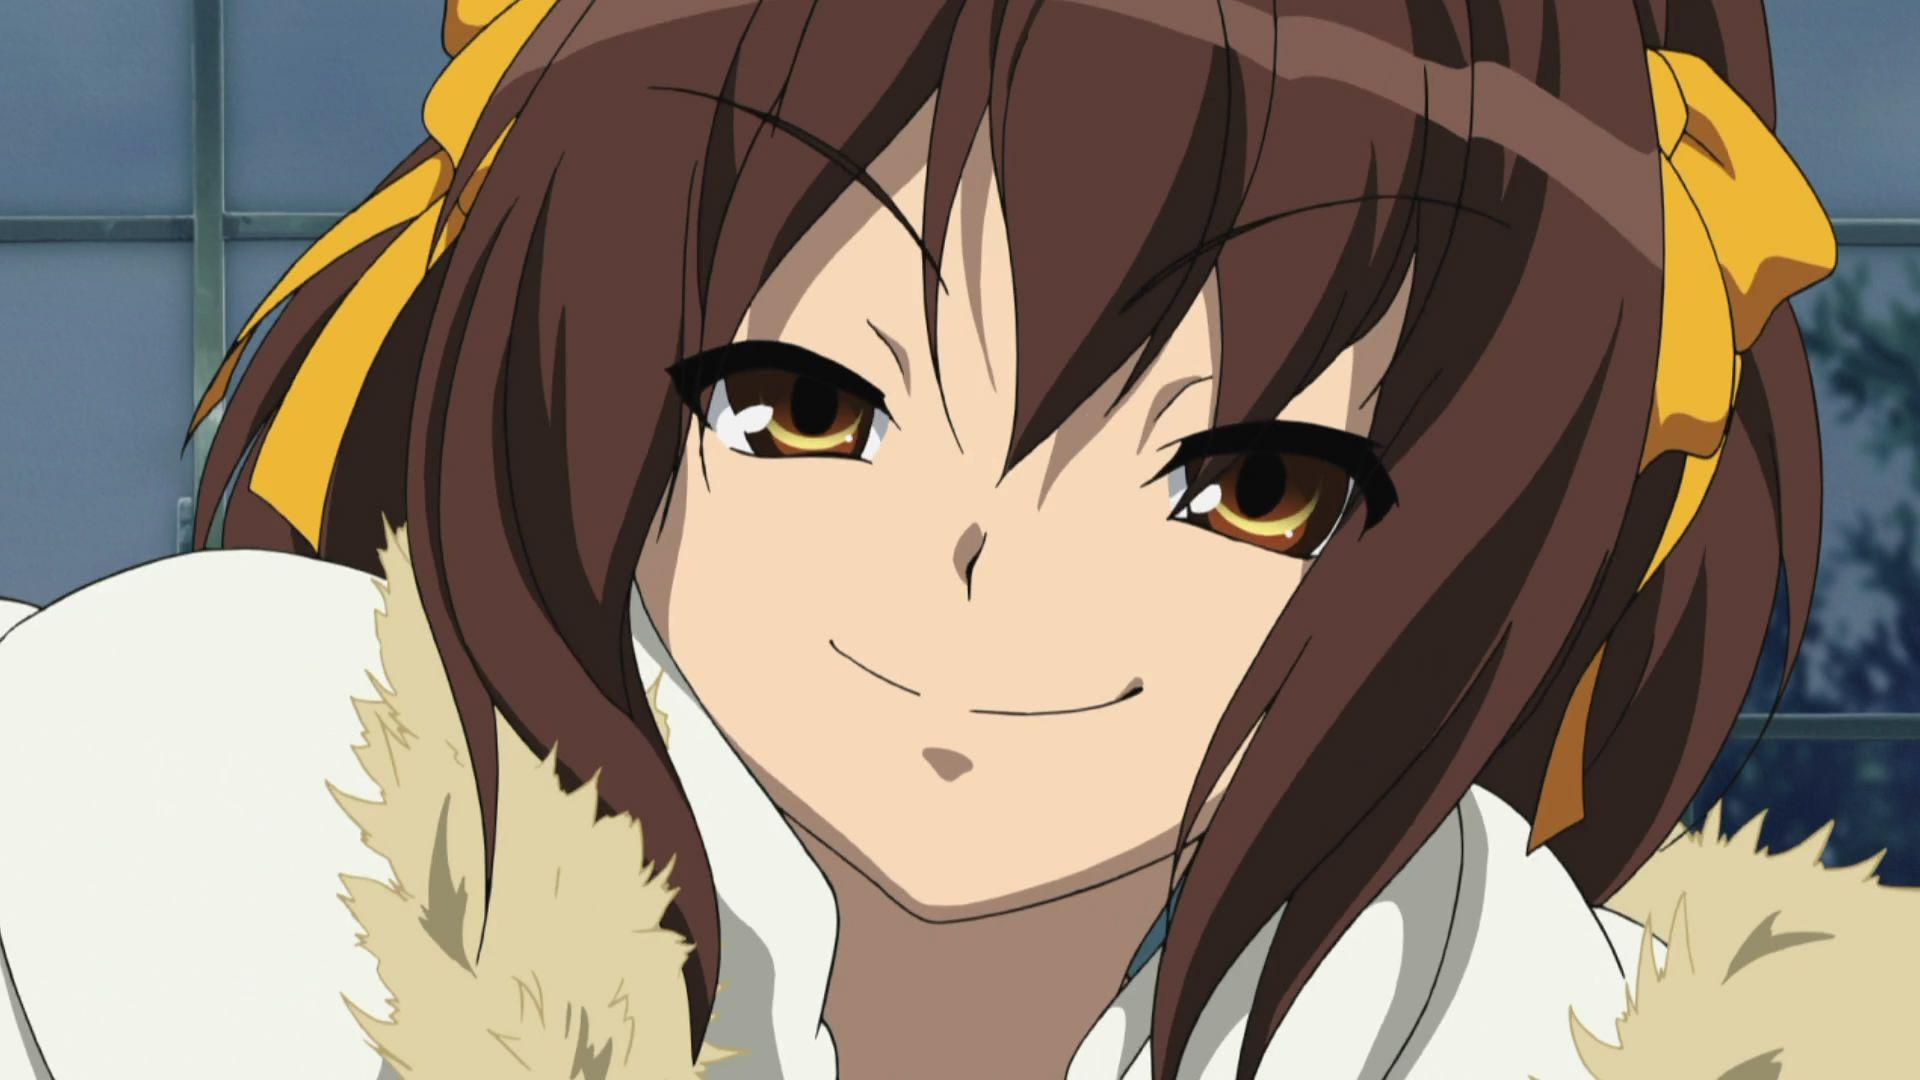 Give me the best smile you've seen of an anime character. : anime.